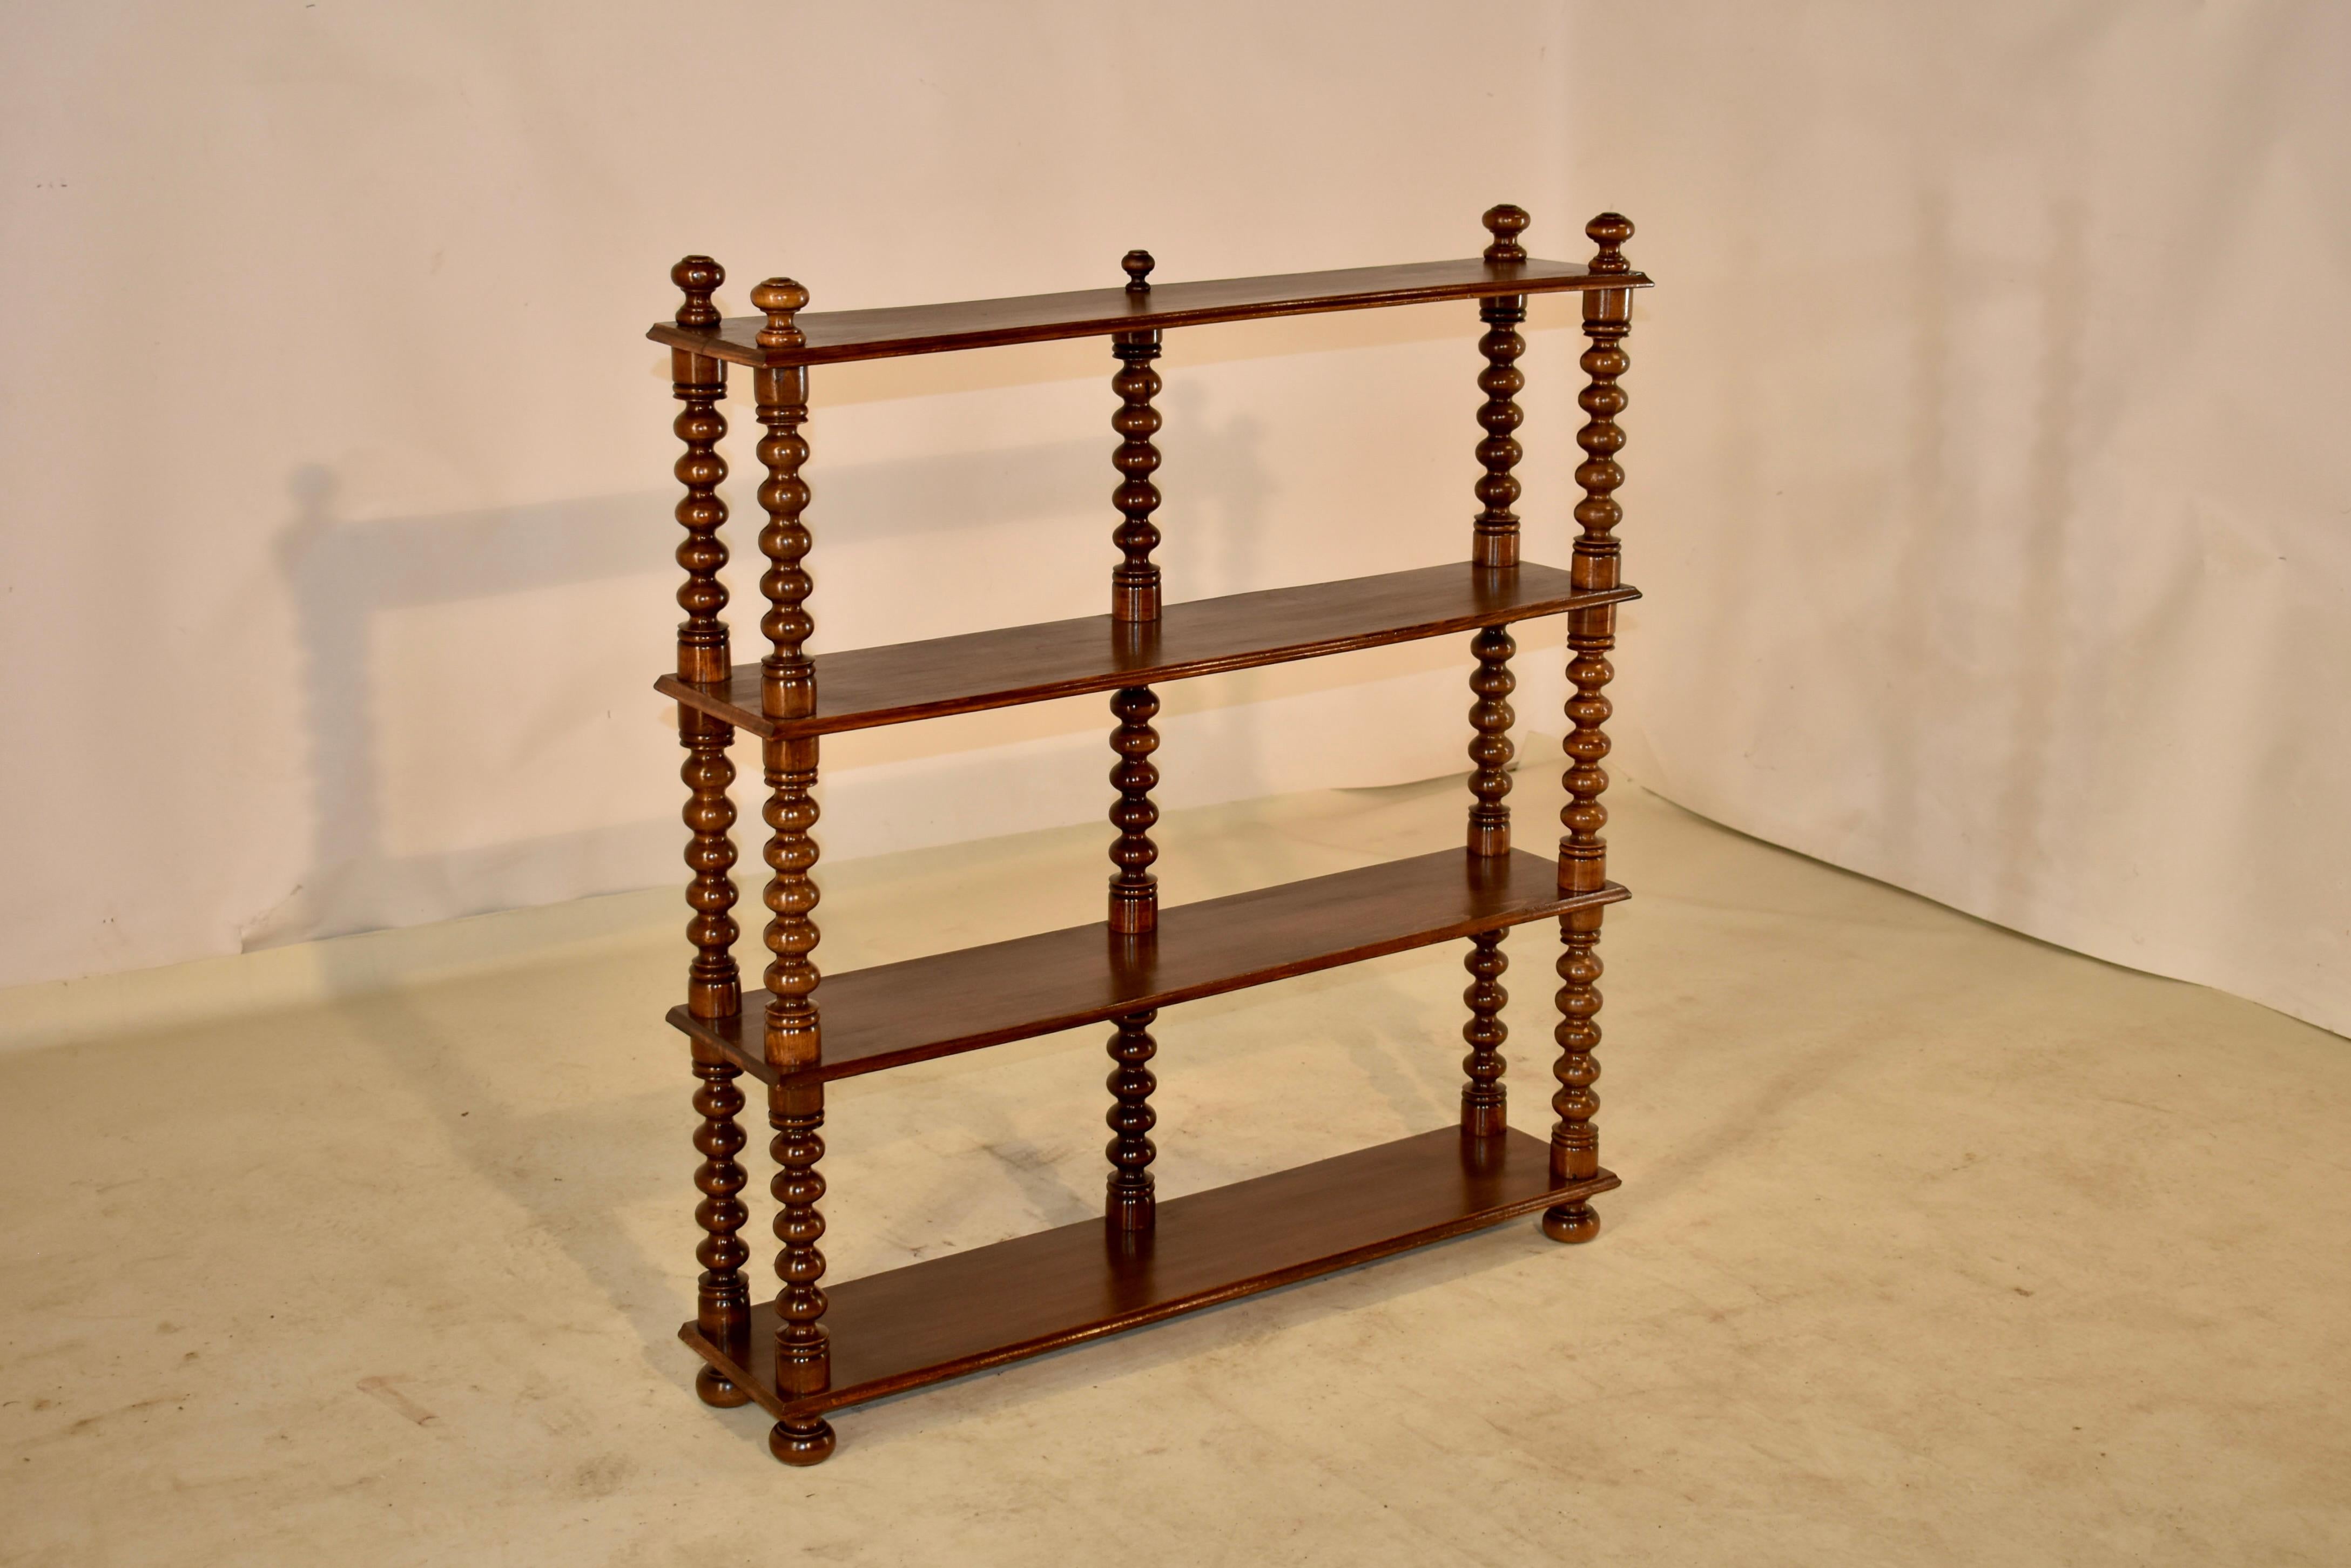 19th Century English standing shelf made from mahogany. It has lovely hand turned finials and shelf supports in a bobbin pattern, and is resting on lovely hand turned bun feet.